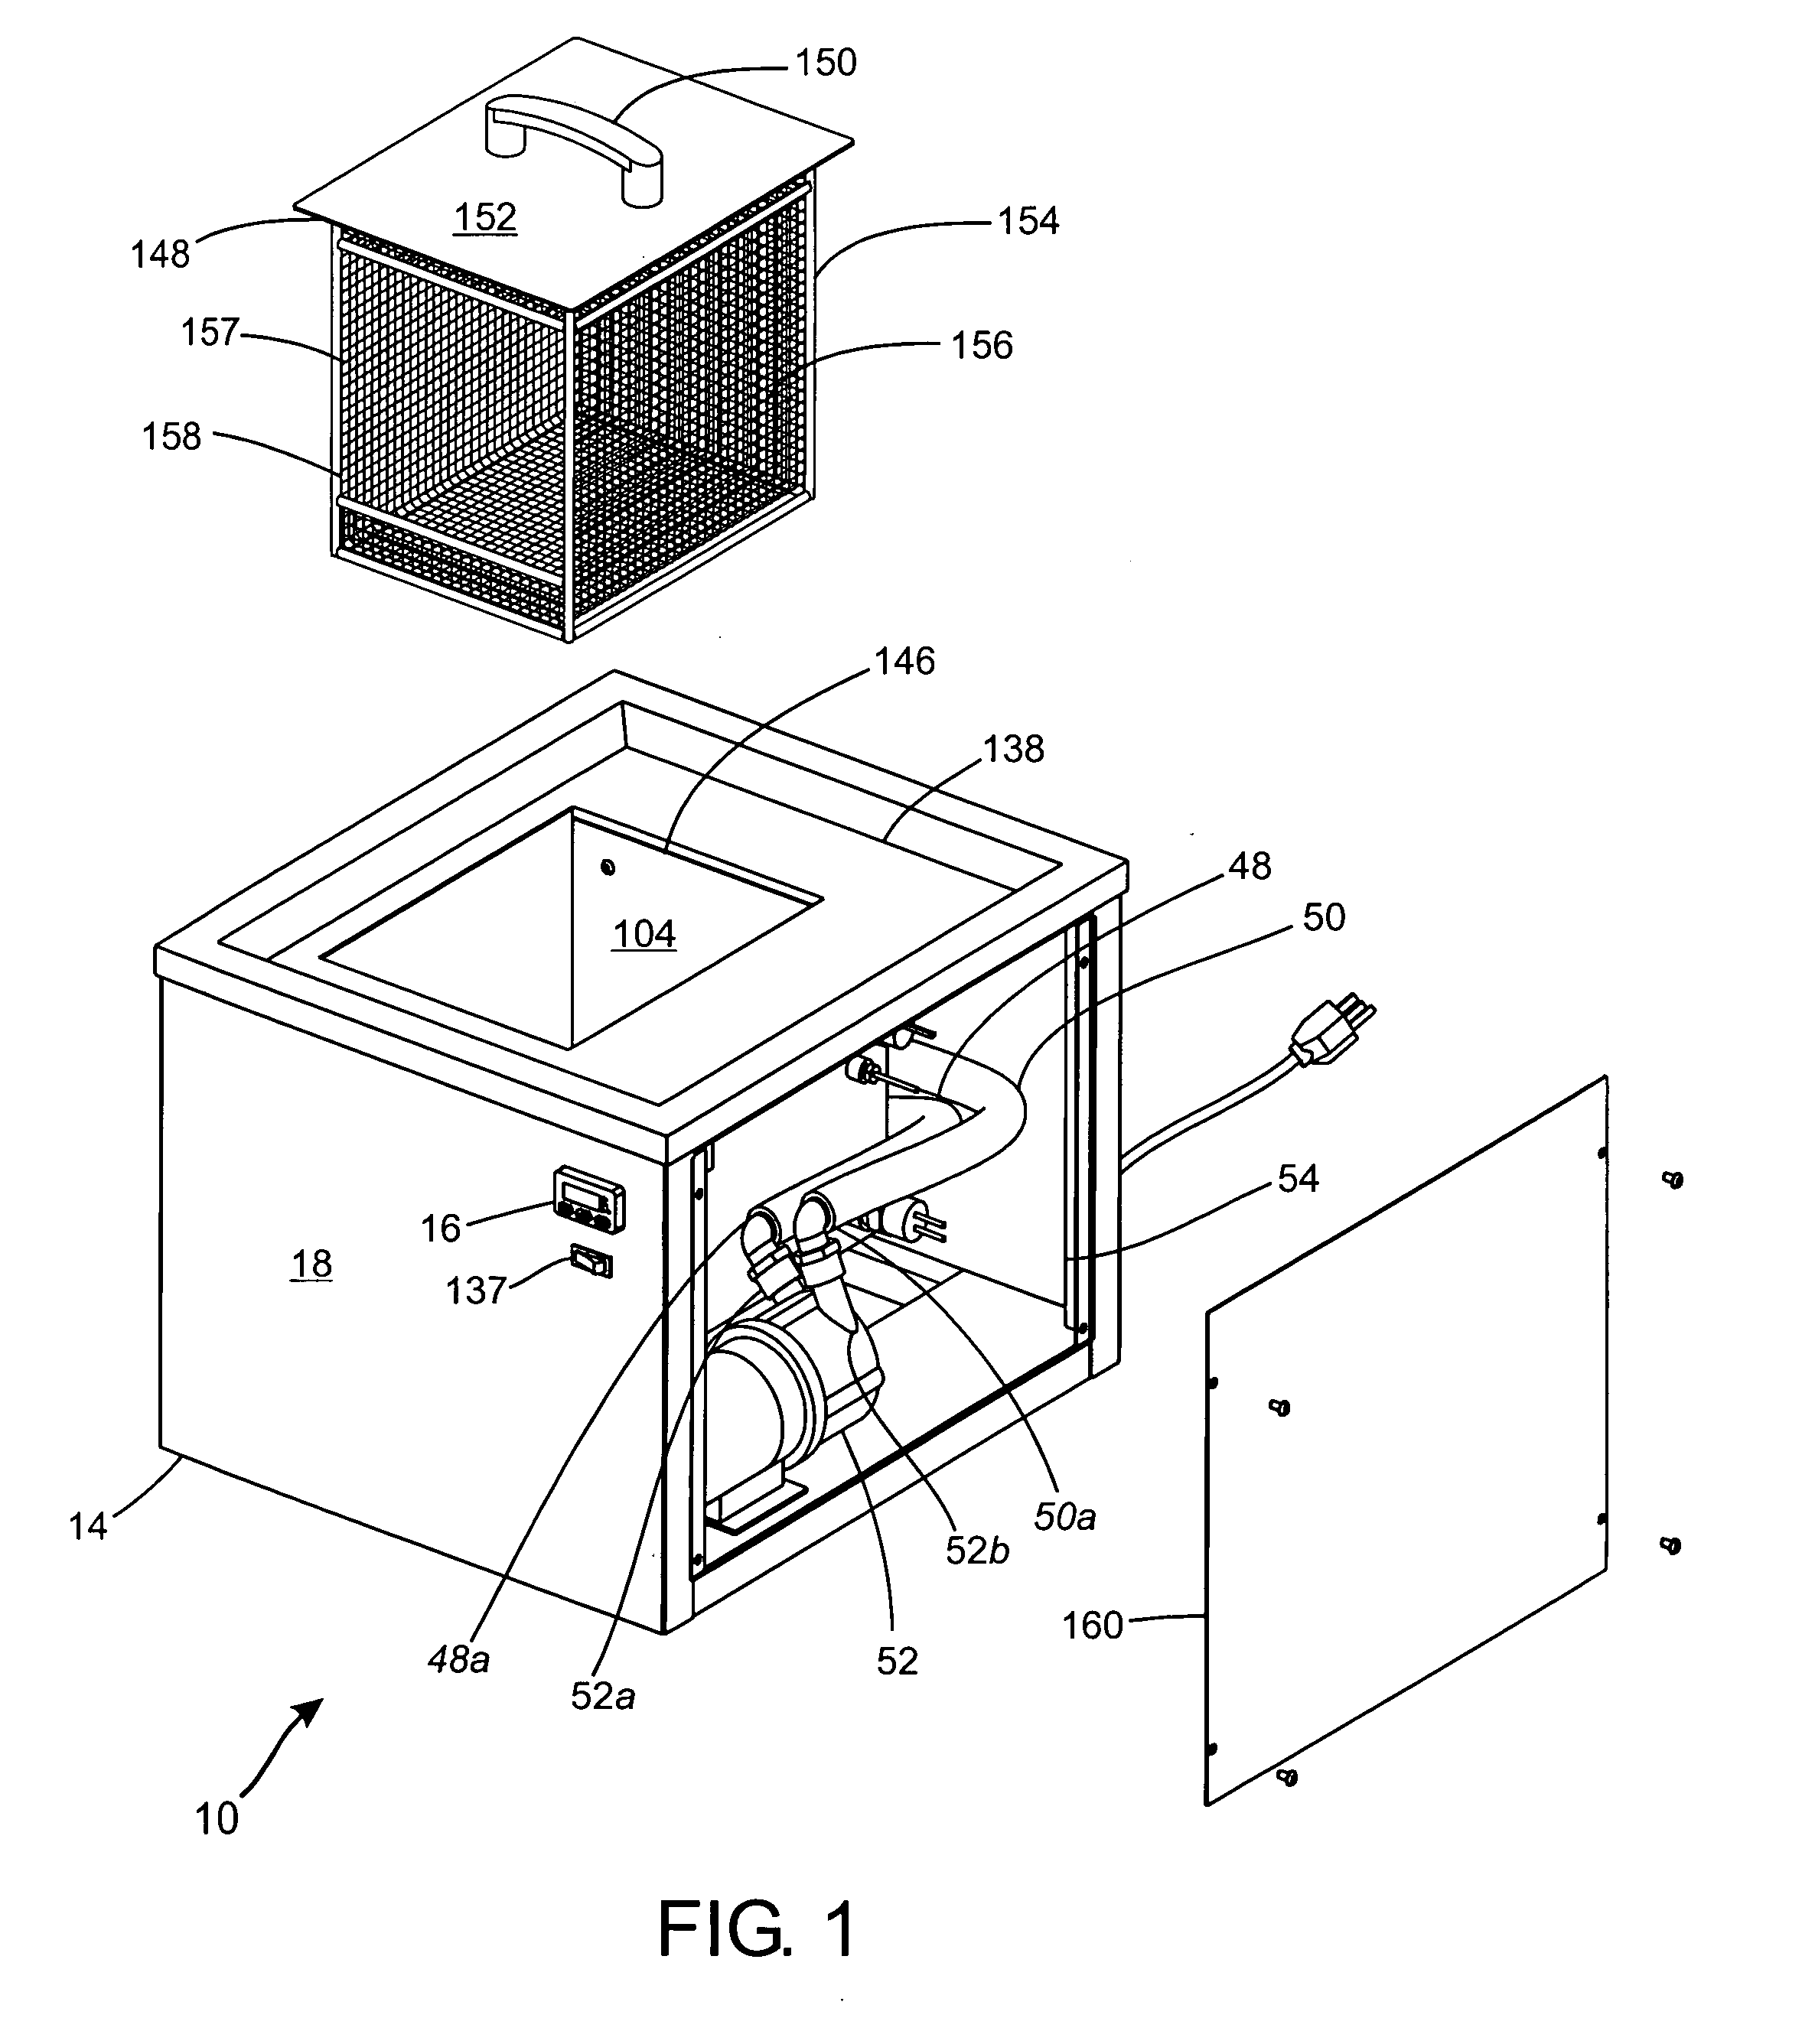 Apparatus for removing water-soluble support material from one or more rapid prototype parts